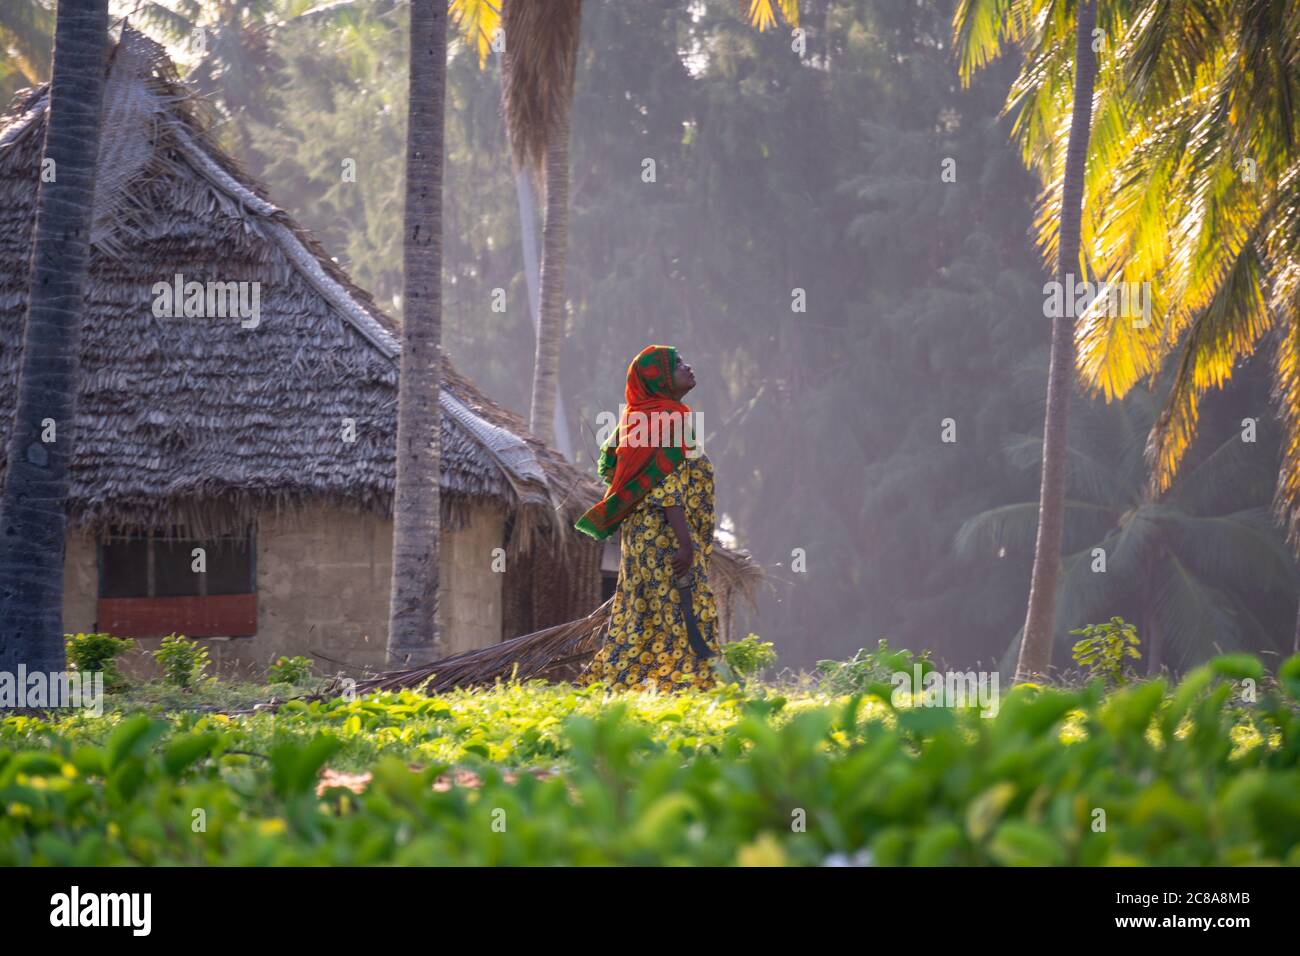 Zanzibar, Paje - January 2020: Muslim African Woman Walking near her statch roofed Hut between Palm Trees in the Garden at Evening Time Stock Photo